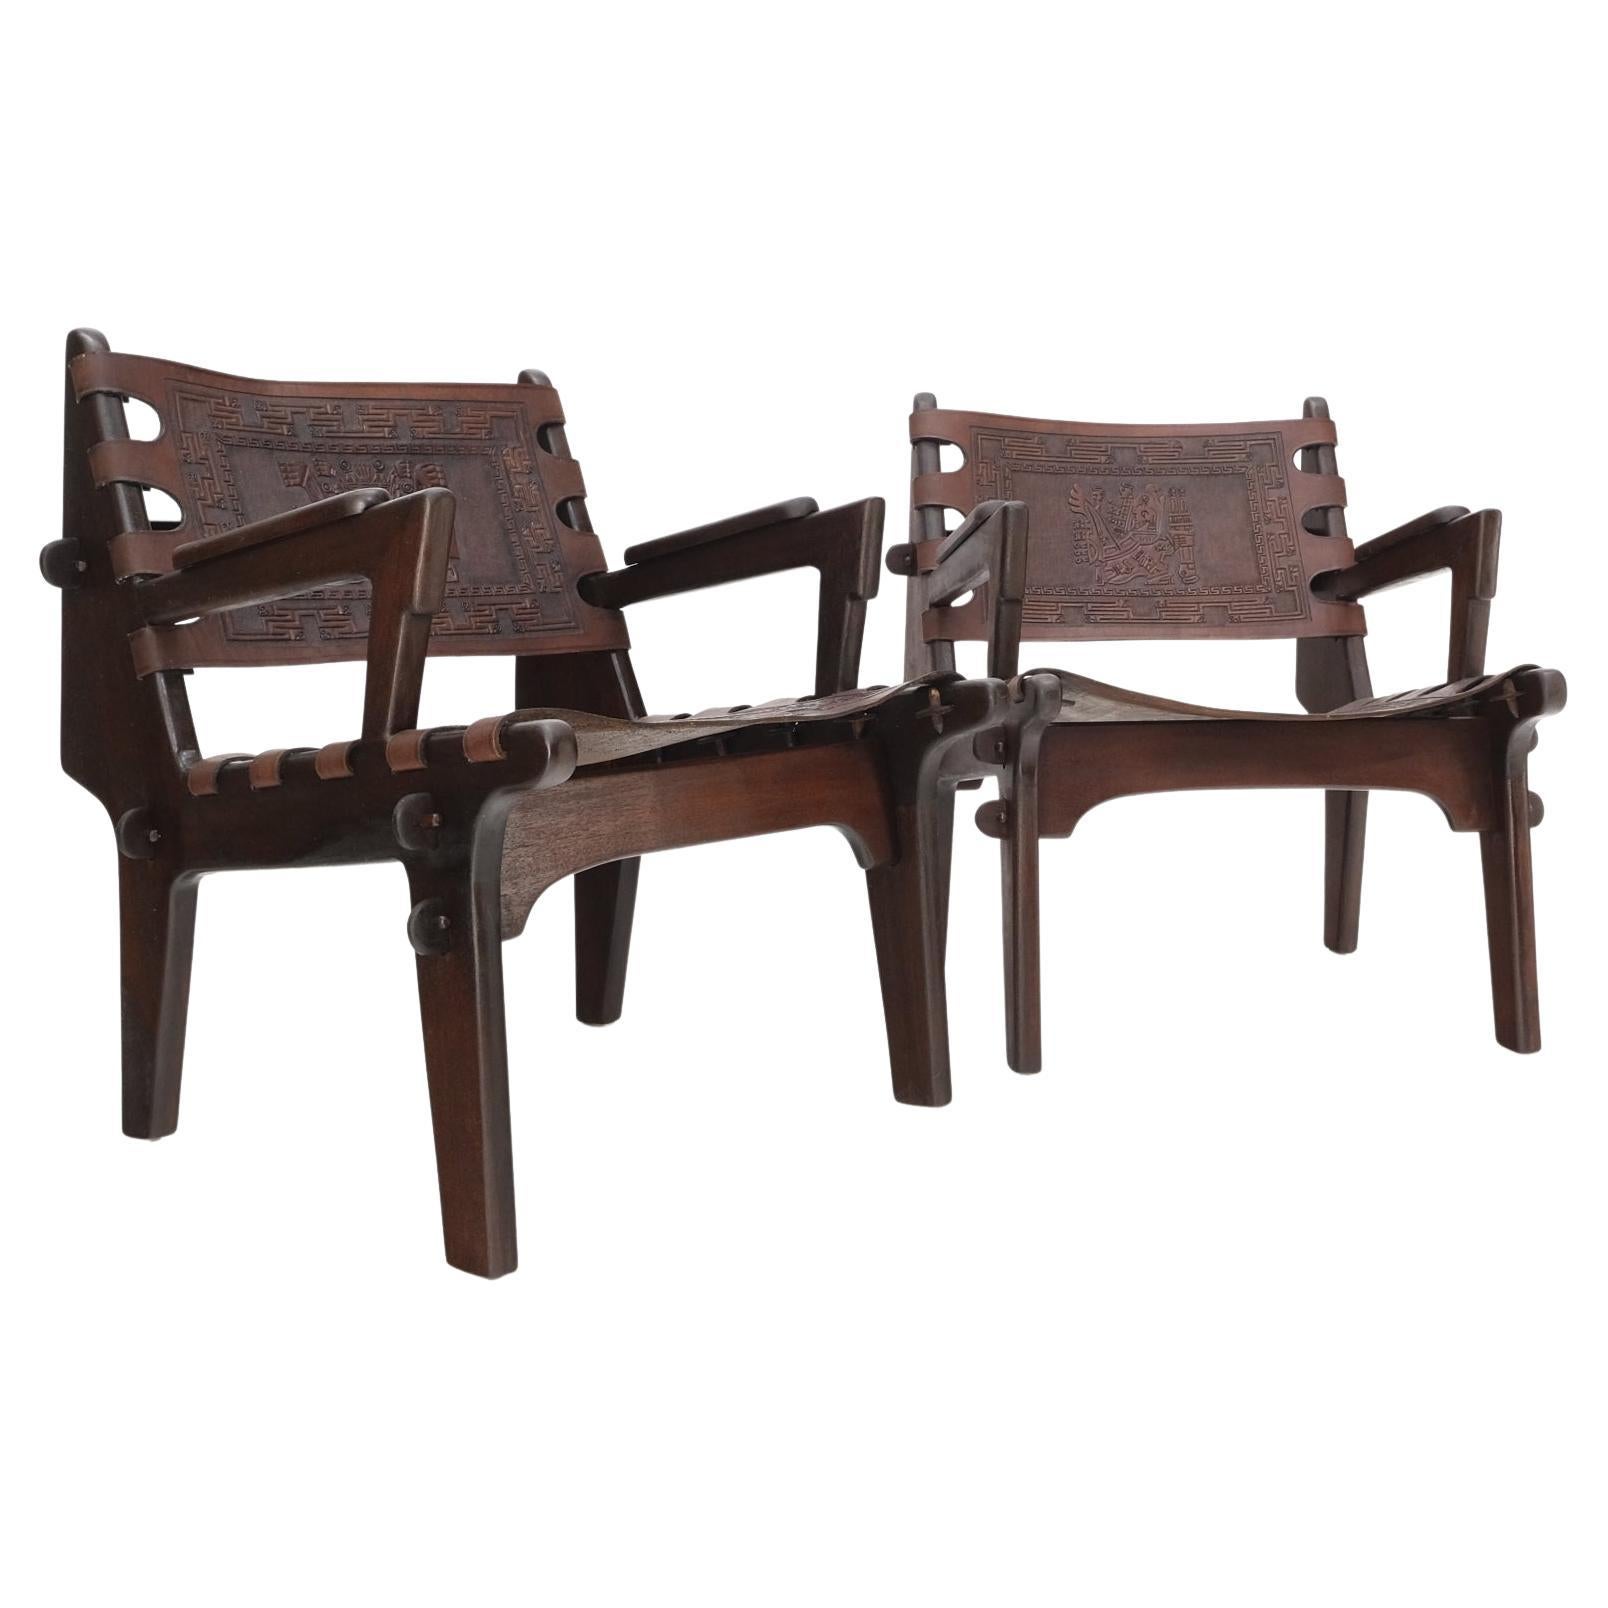 Pair of Walnut Carved Tolled Leather Sling Seats Arm Chairs by Angel Pazmino For Sale